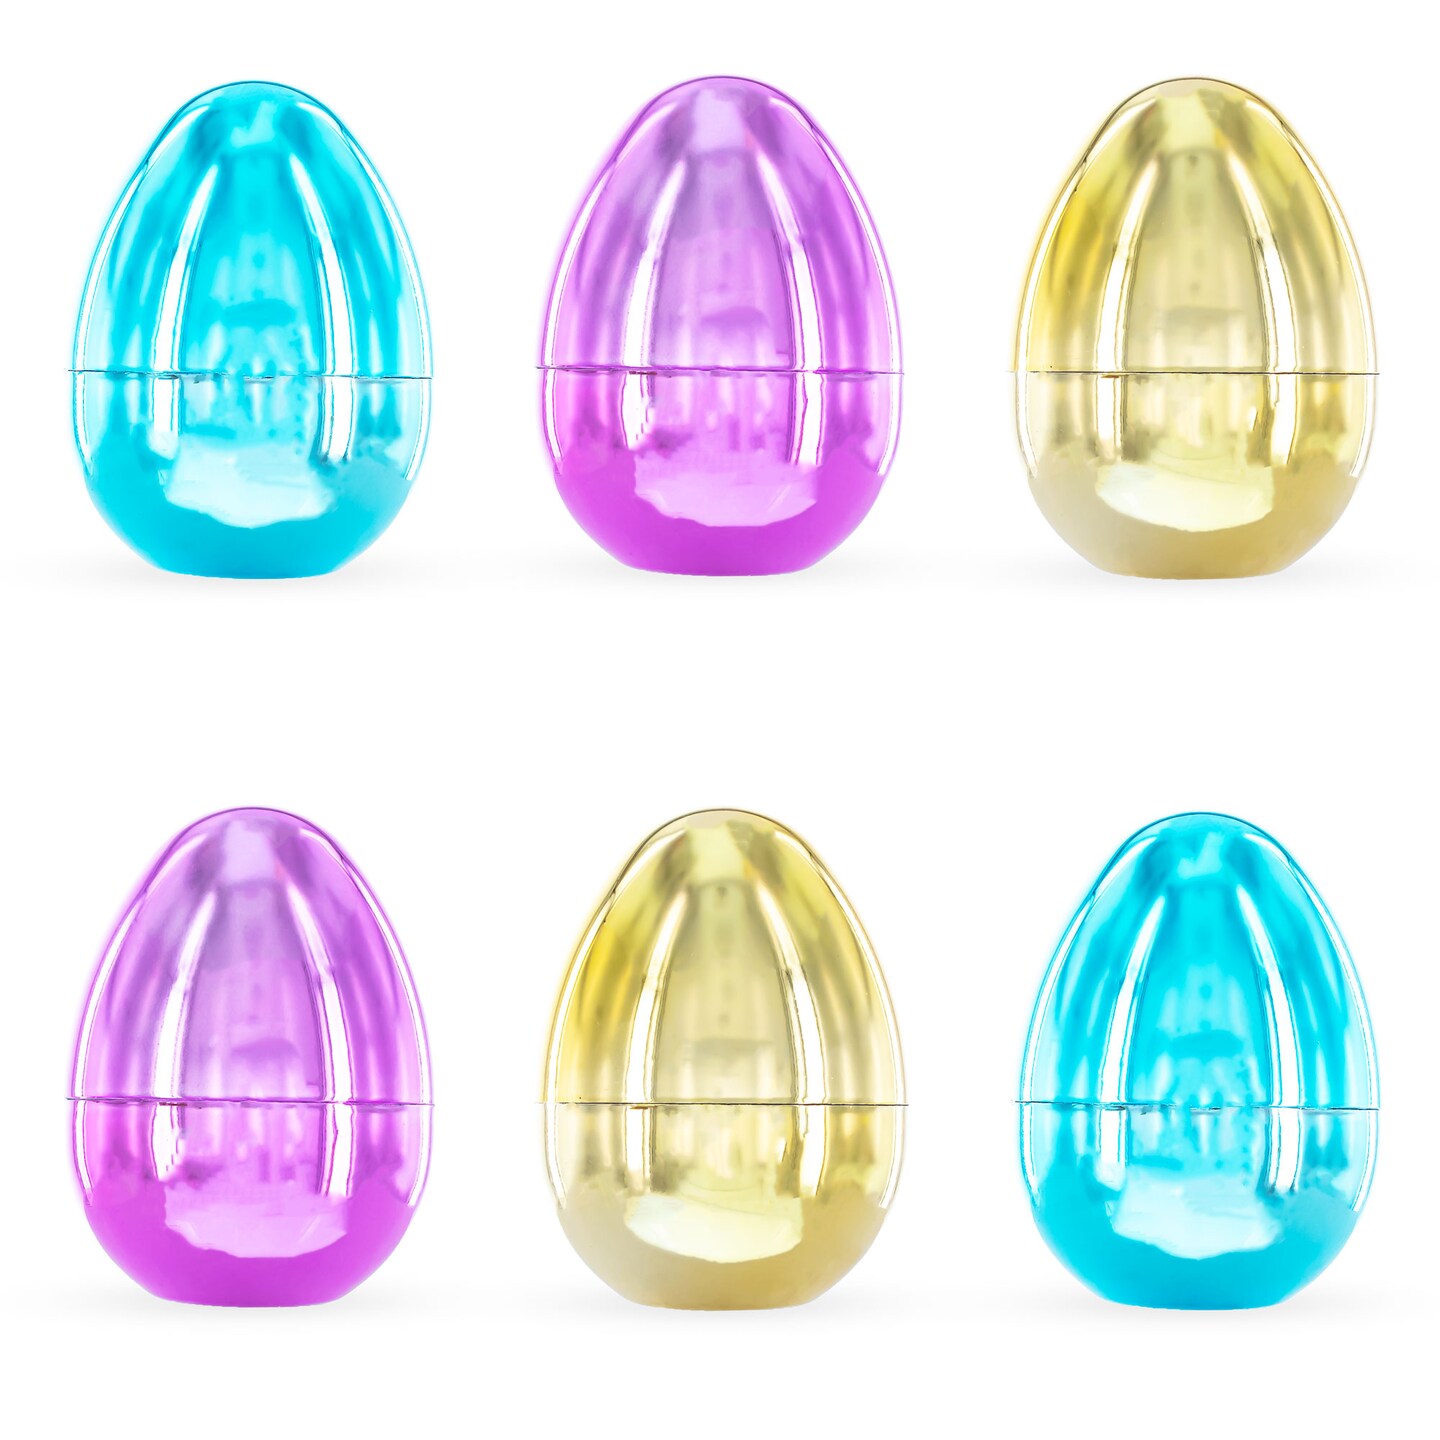 Easter Shine and Surprise: Set of 6 Large Fillable Multicolored Metallic Plastic Easter Eggs 4 Inches